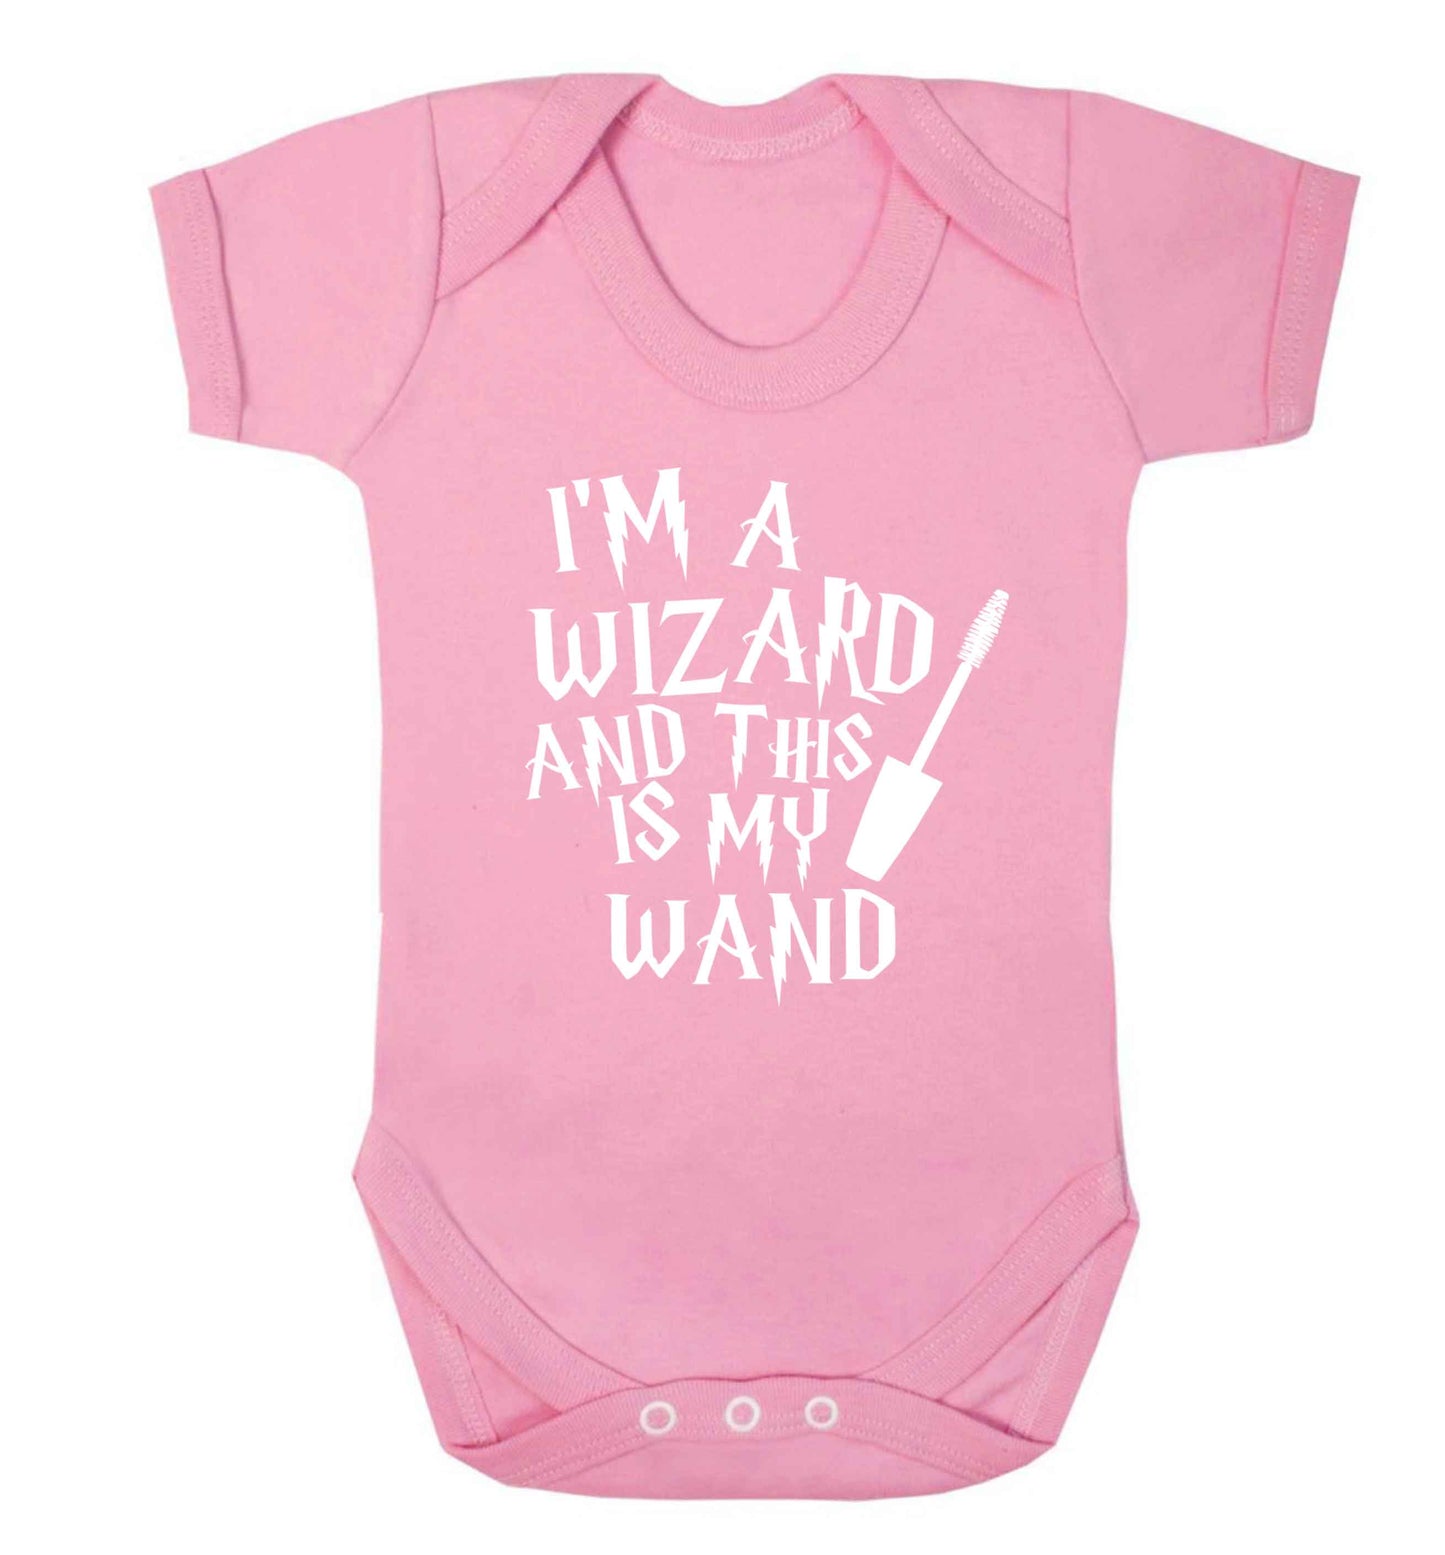 I'm a wizard and this is my wand Baby Vest pale pink 18-24 months